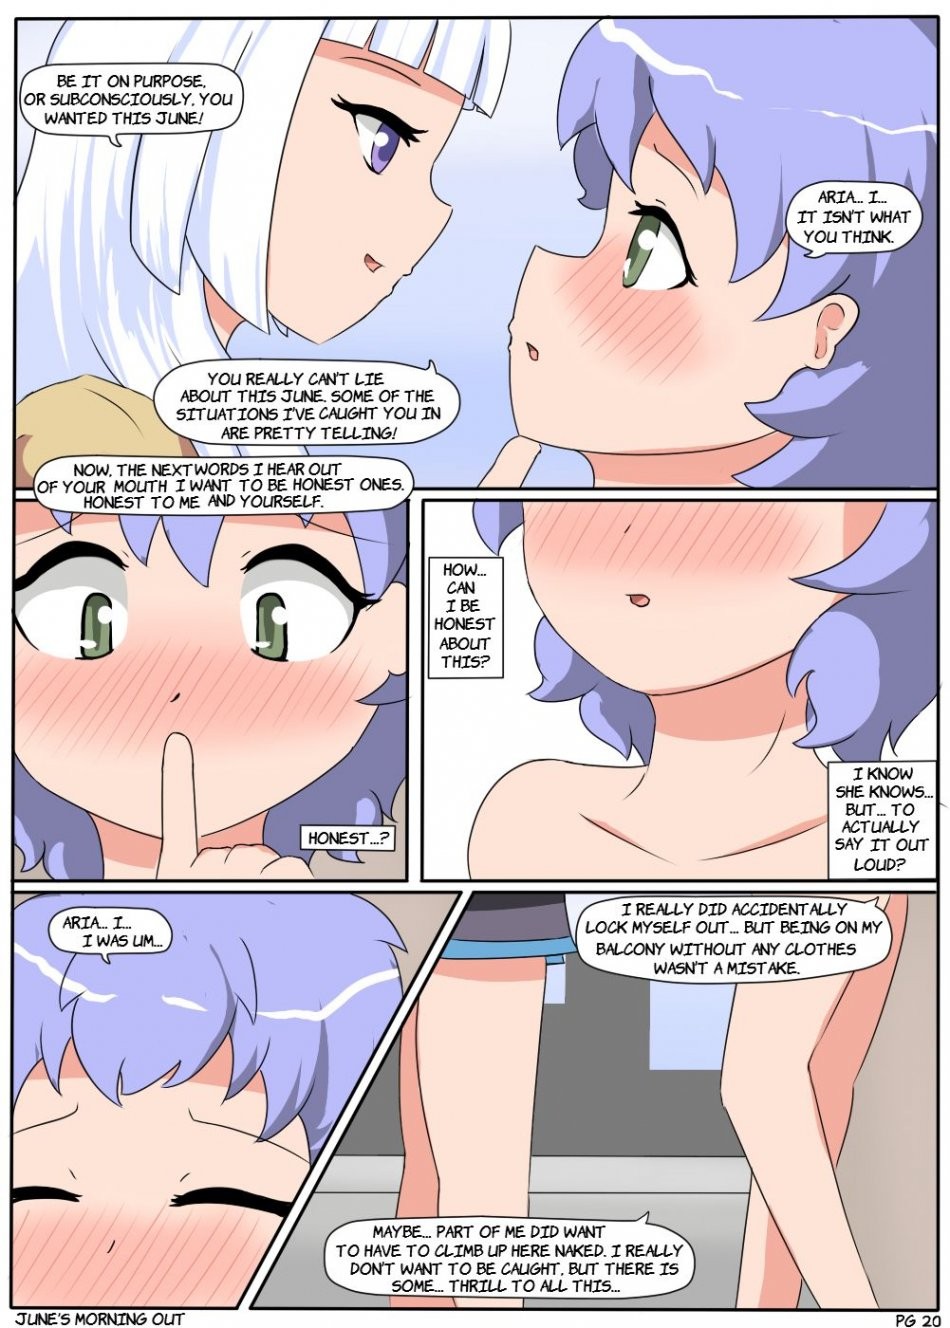 June's Morning Out porn comic picture 20